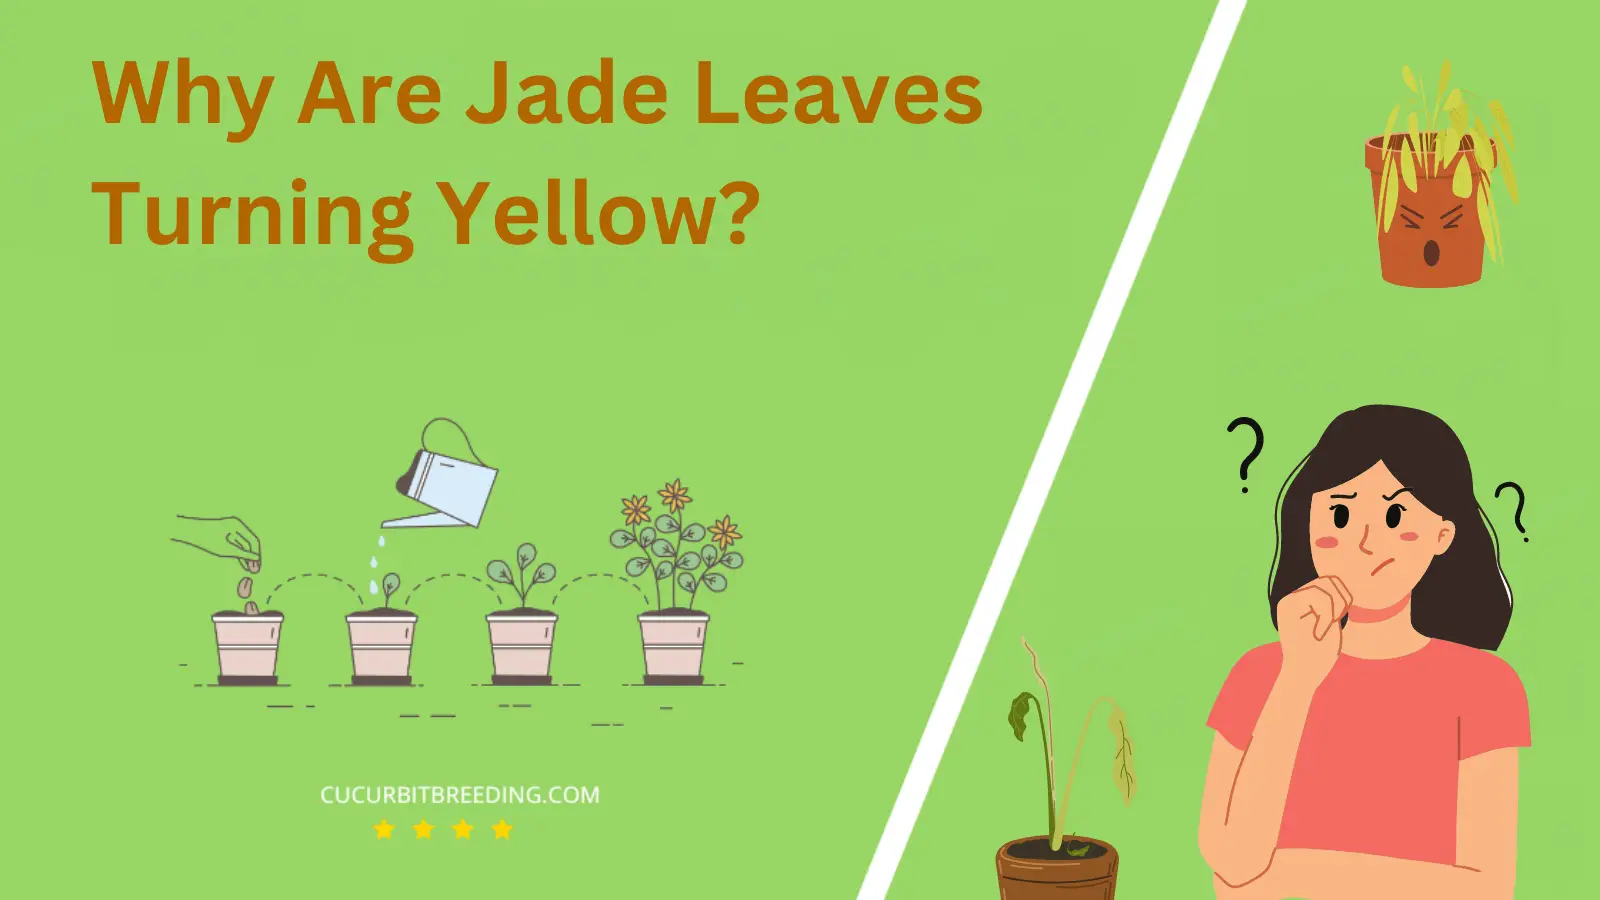 Why Are Jade Leaves Turning Yellow